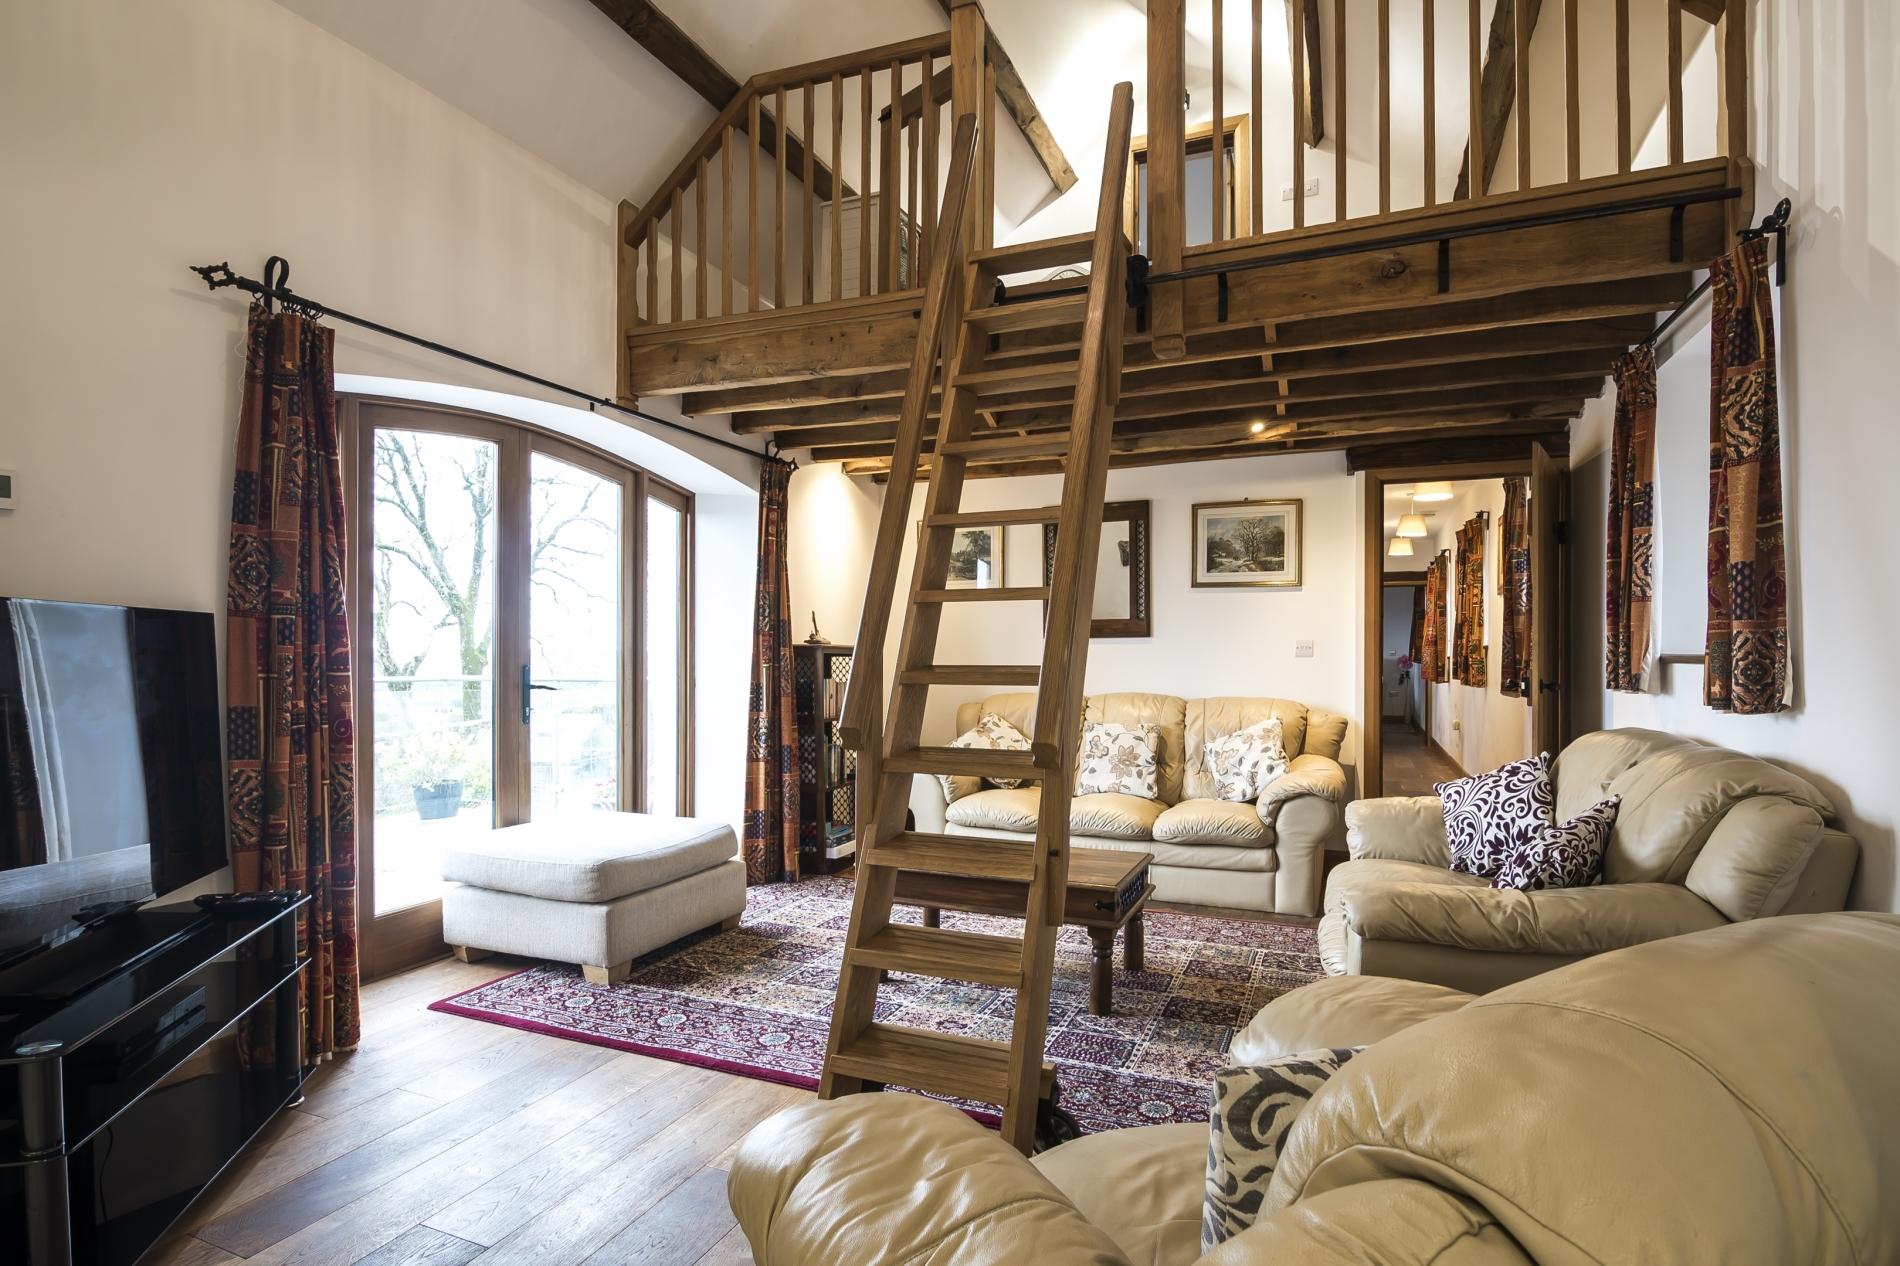 Property Image 1 - Beautifully Converted Barn with Lovely Exposed Beams